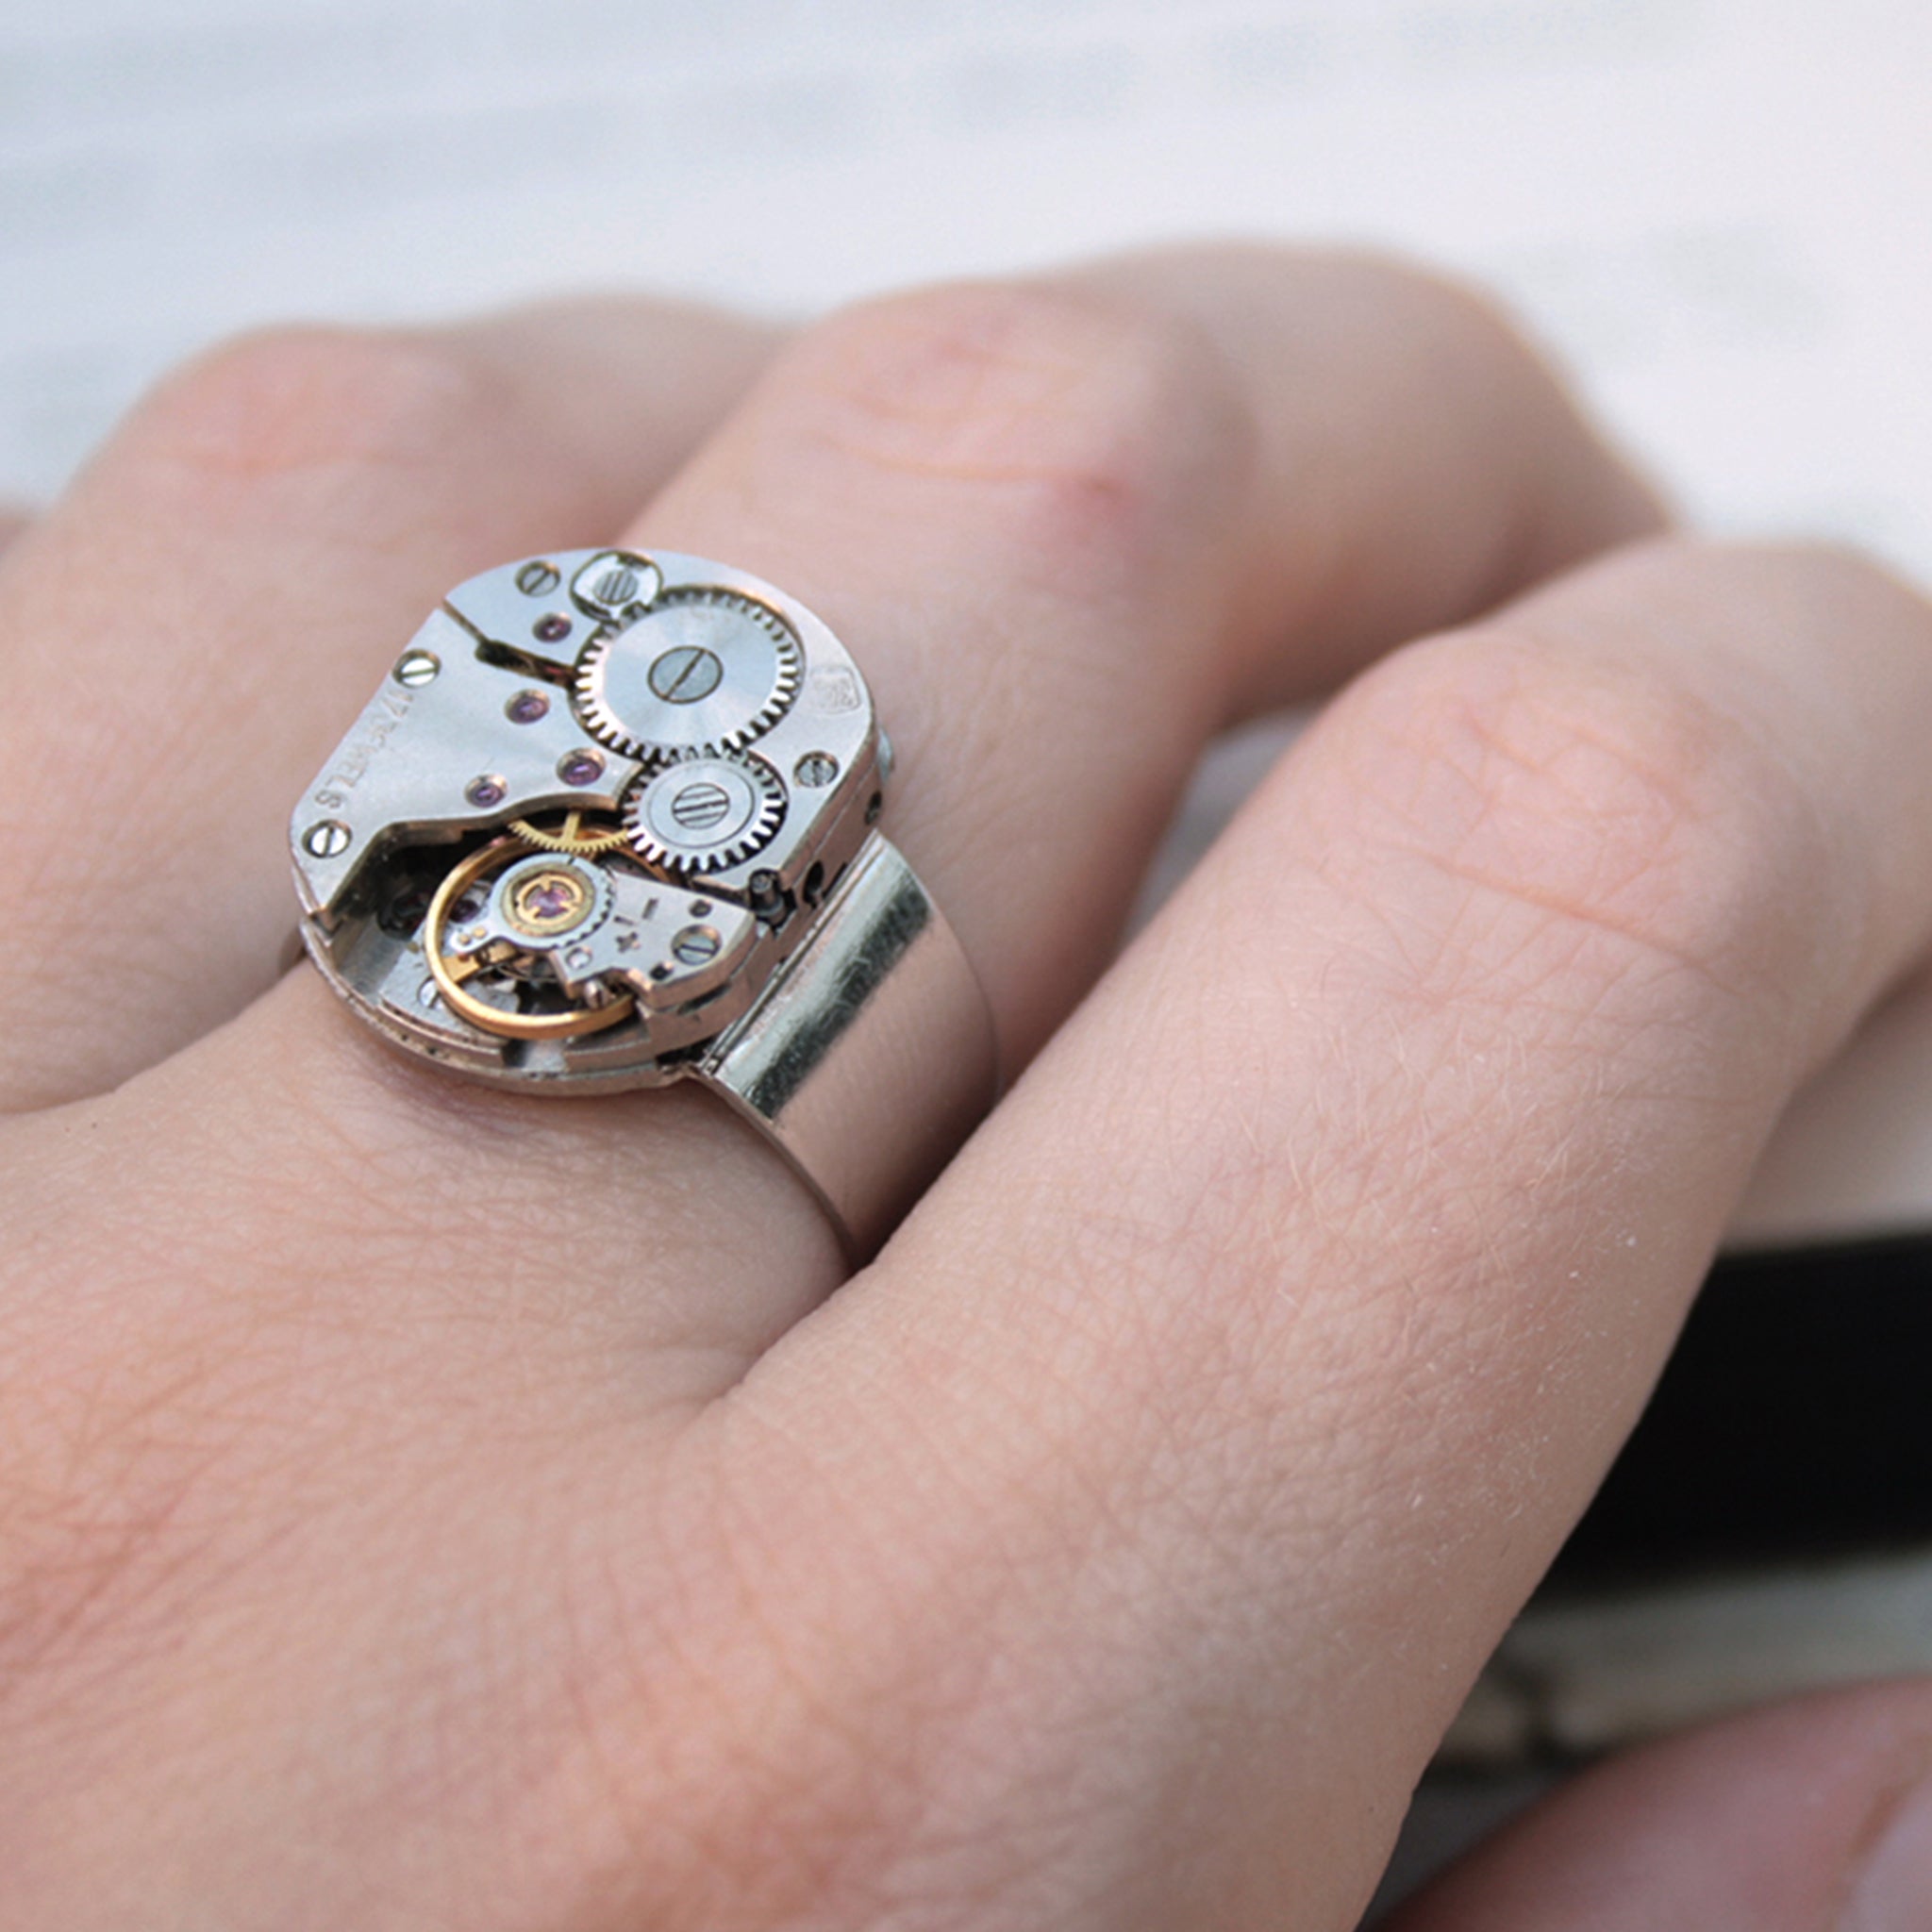 Mens Pinky Ring in Steampunk Style made of watch mechanism worn on hand